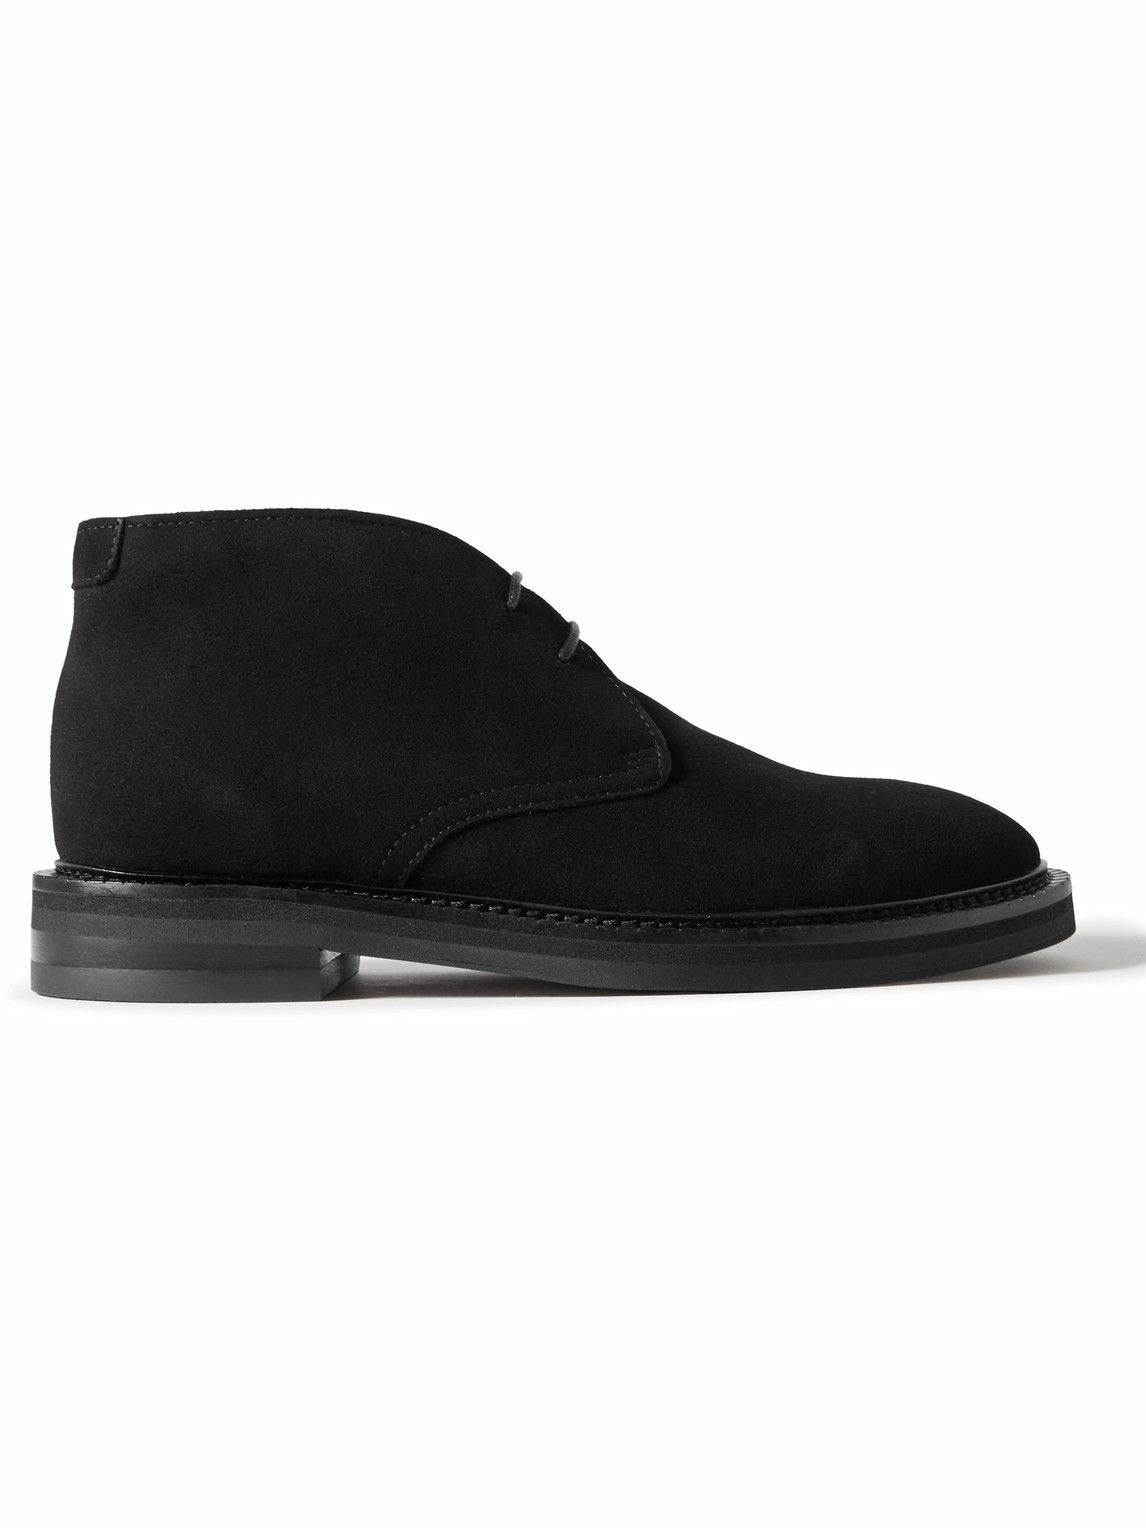 Mr P. - Lucien Regenerated Suede by evolo® Desert Boots - Black Mr P.